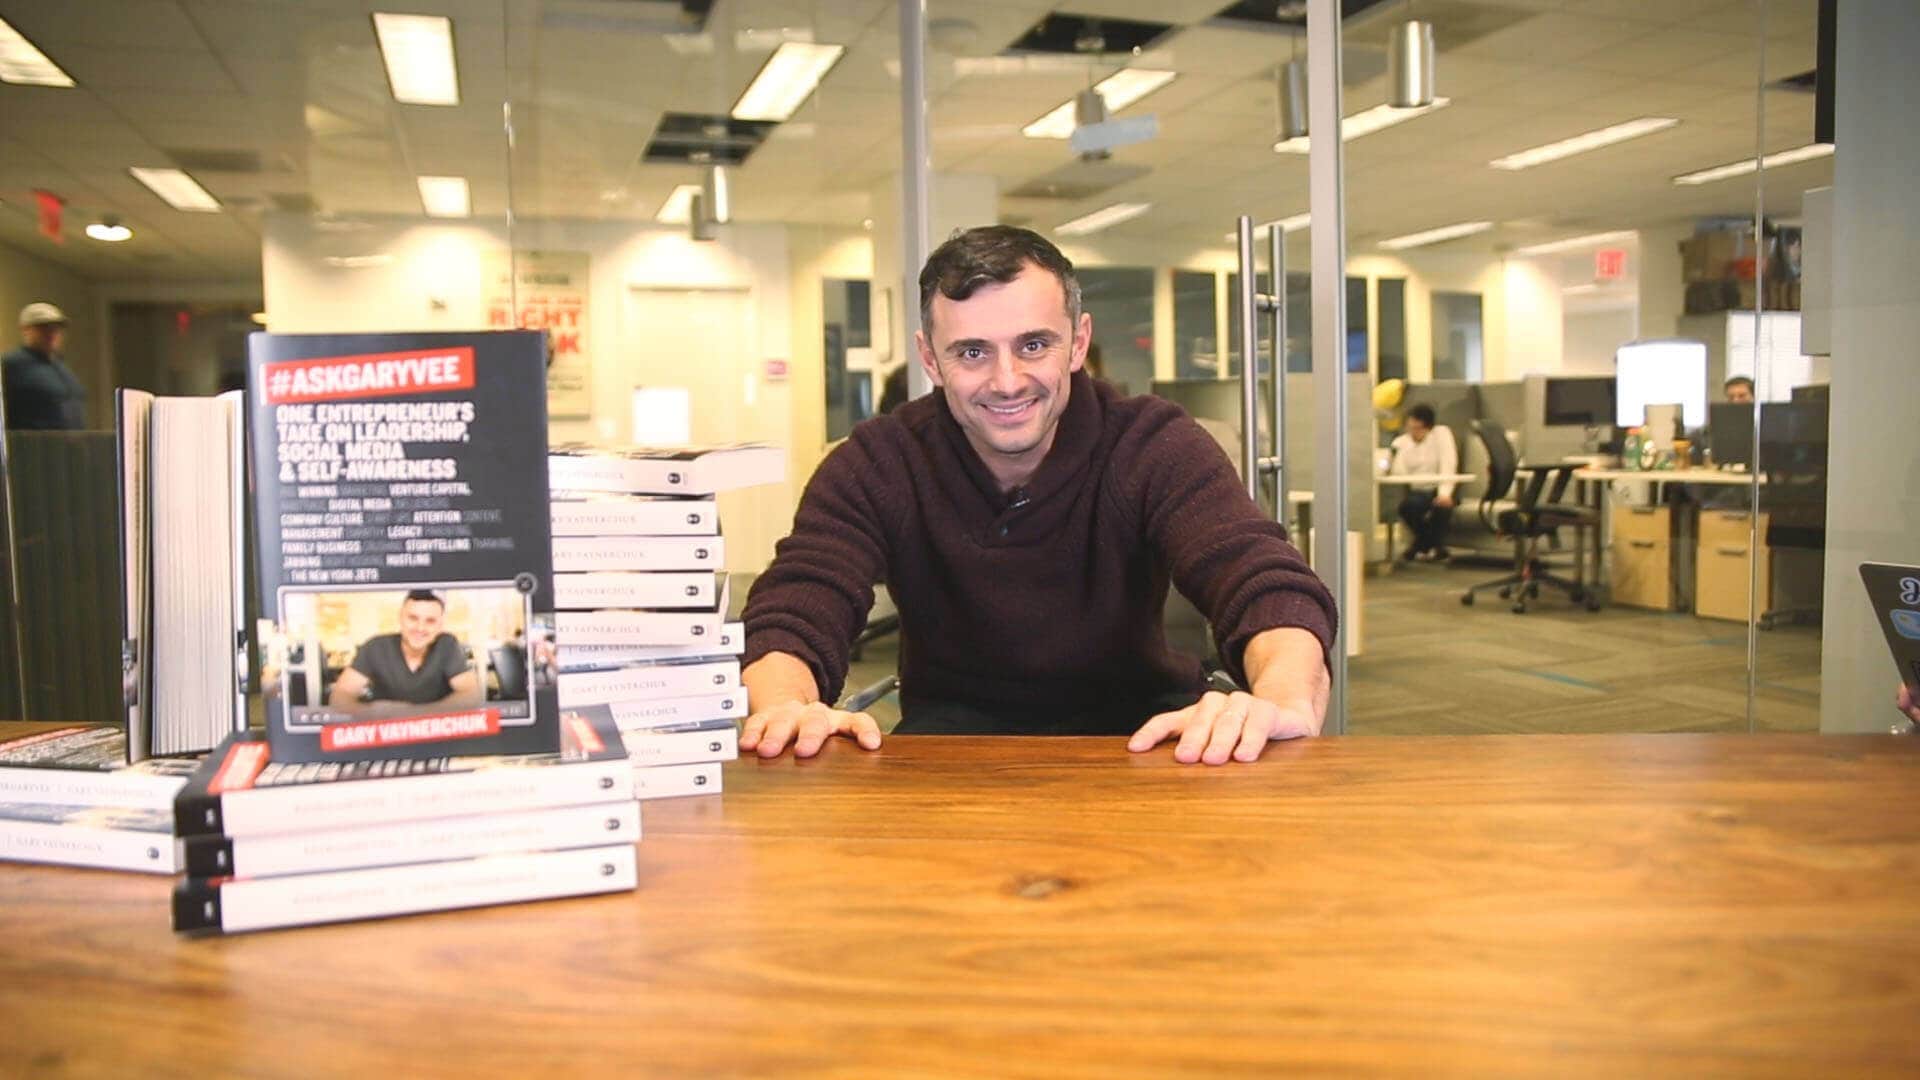 The Future of Instagram, Employee Turnover & How to Make Money as a Teen: #AskGaryVee Episode 181